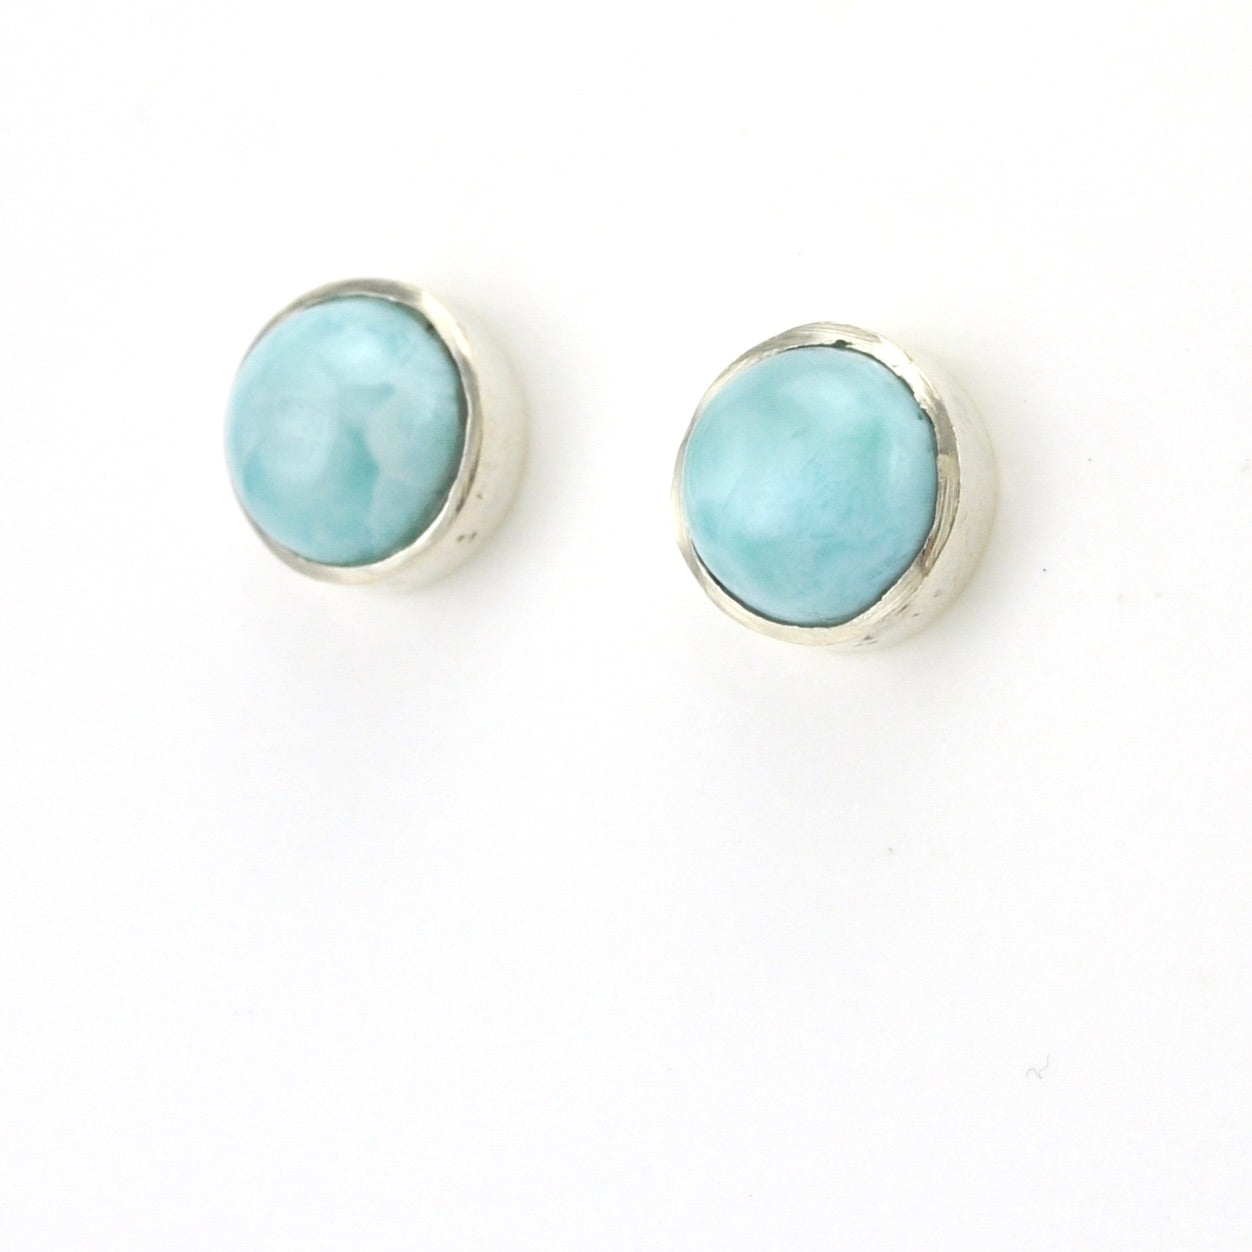 Sterling Silver Larimar 10mm Round Post Earrings